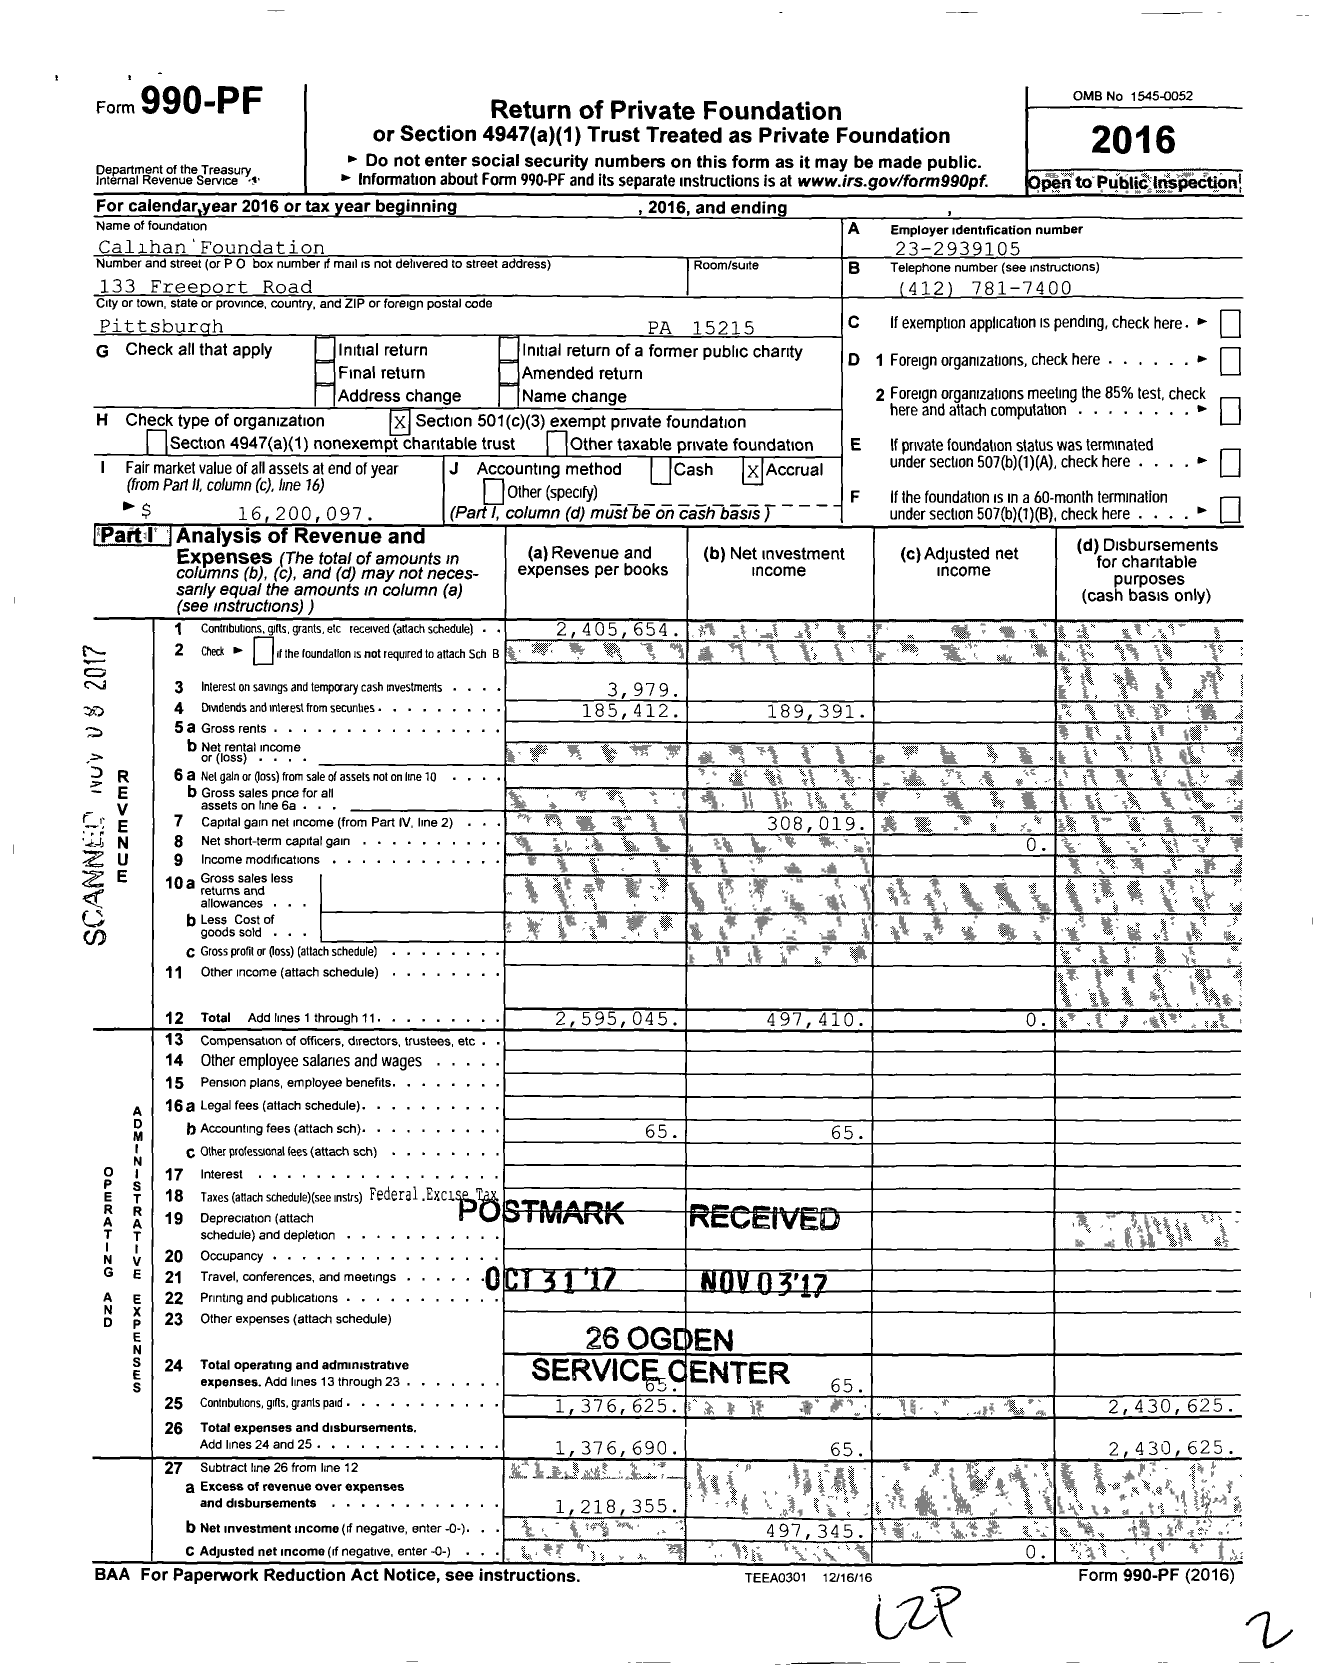 Image of first page of 2016 Form 990PF for Calihan Foundation